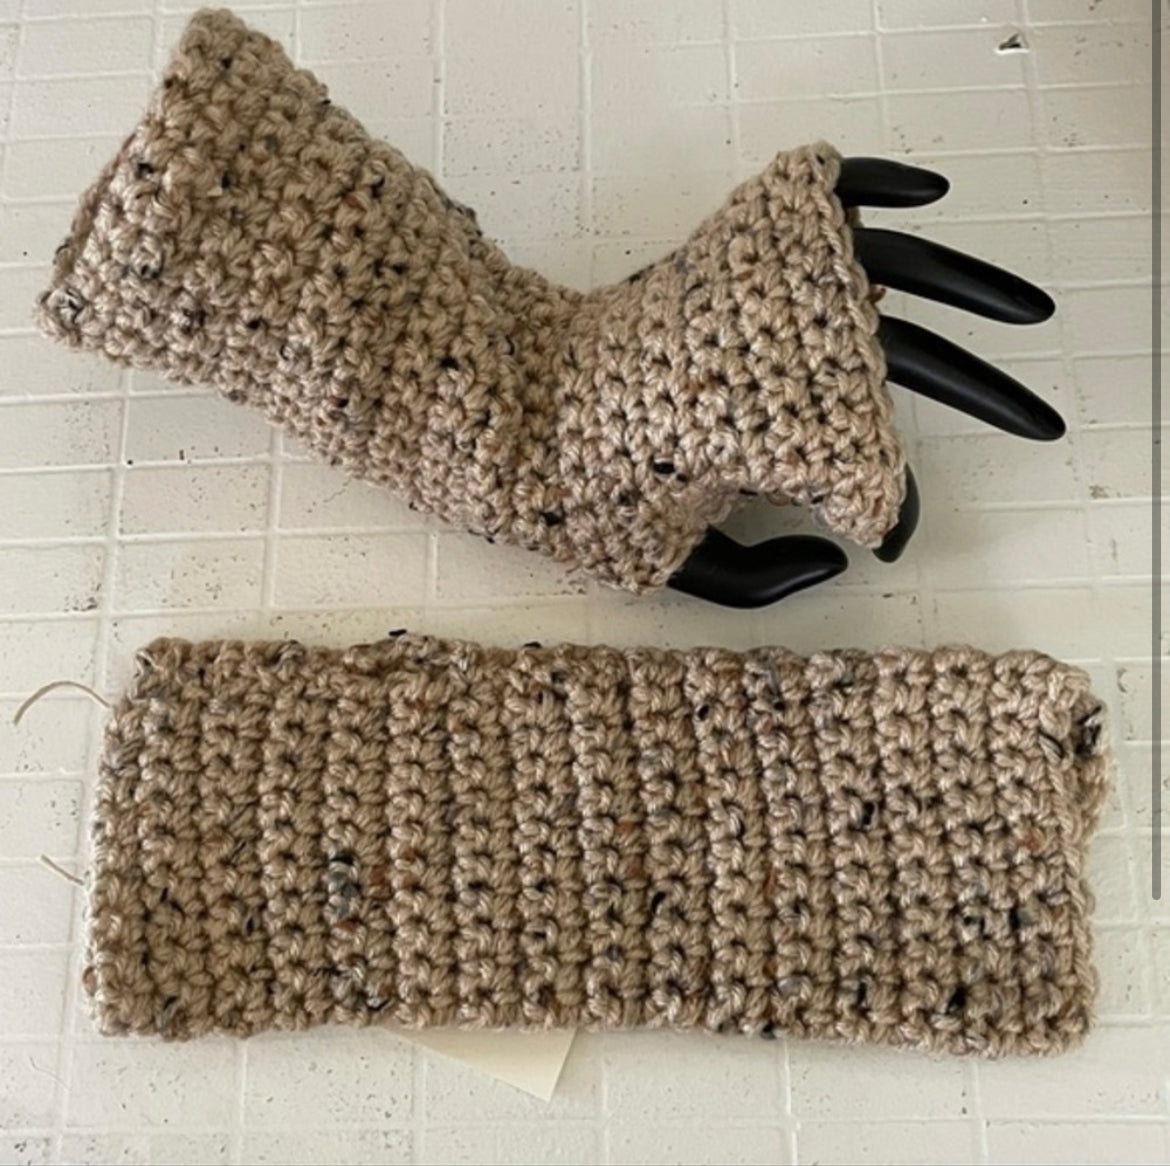 Texting Tech Wrist Warmers Dark Speckled Wheat Tweed Crochet Knit Spring Fall Winter Writing Gaming Fingerless Gloves